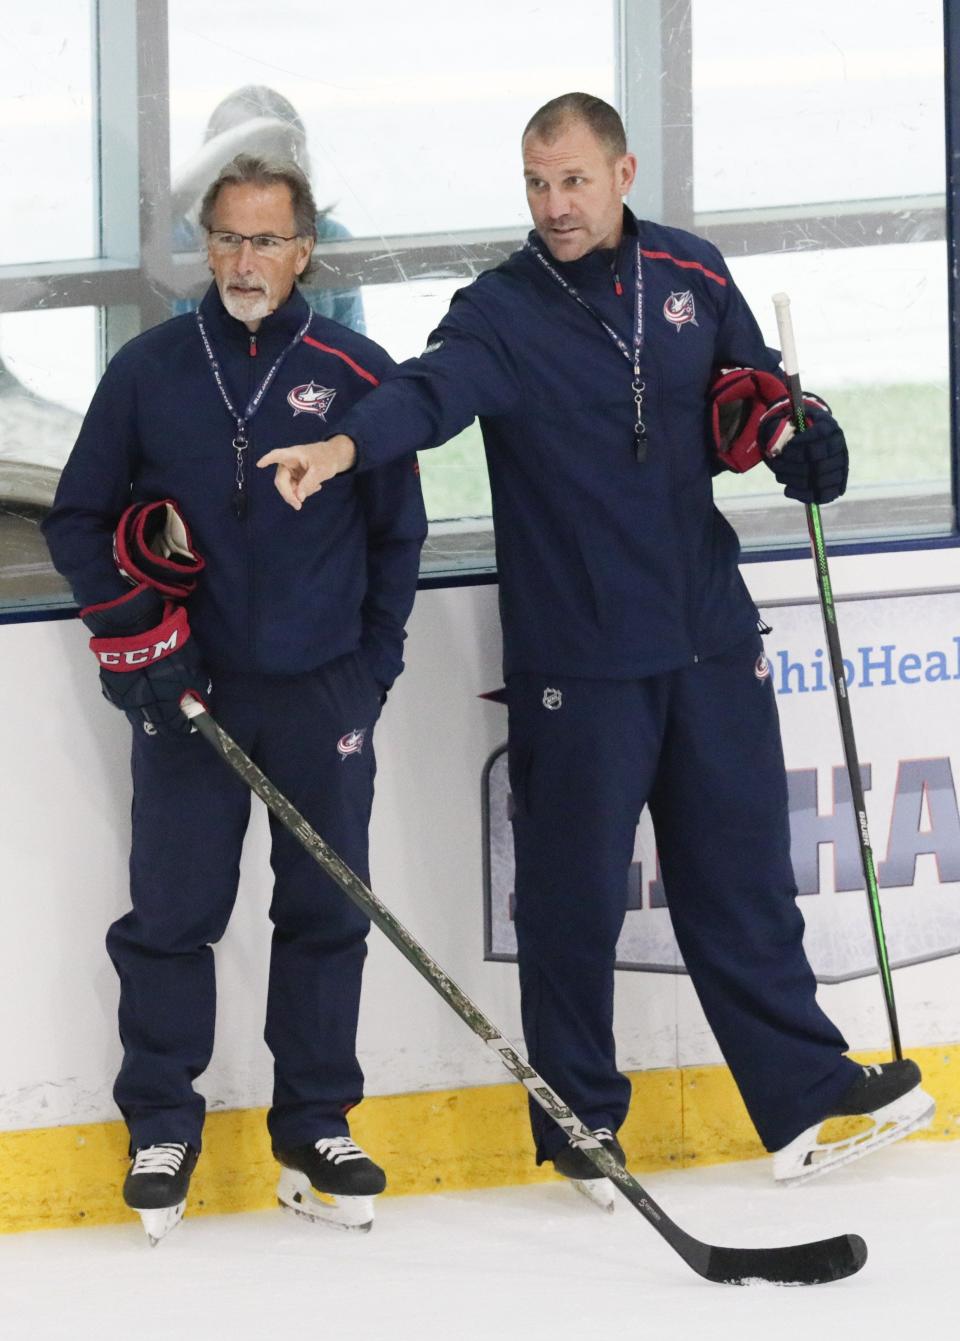 Columbus Blue Jackets head coach John Tortorella, left, and assistant coach Brad Larsen, right, chat during postseason training camp on Monday, July 13, 2020 at the OhioHealth Ice Haus in Columbus, Ohio. [Joshua A. Bickel/Dispatch]